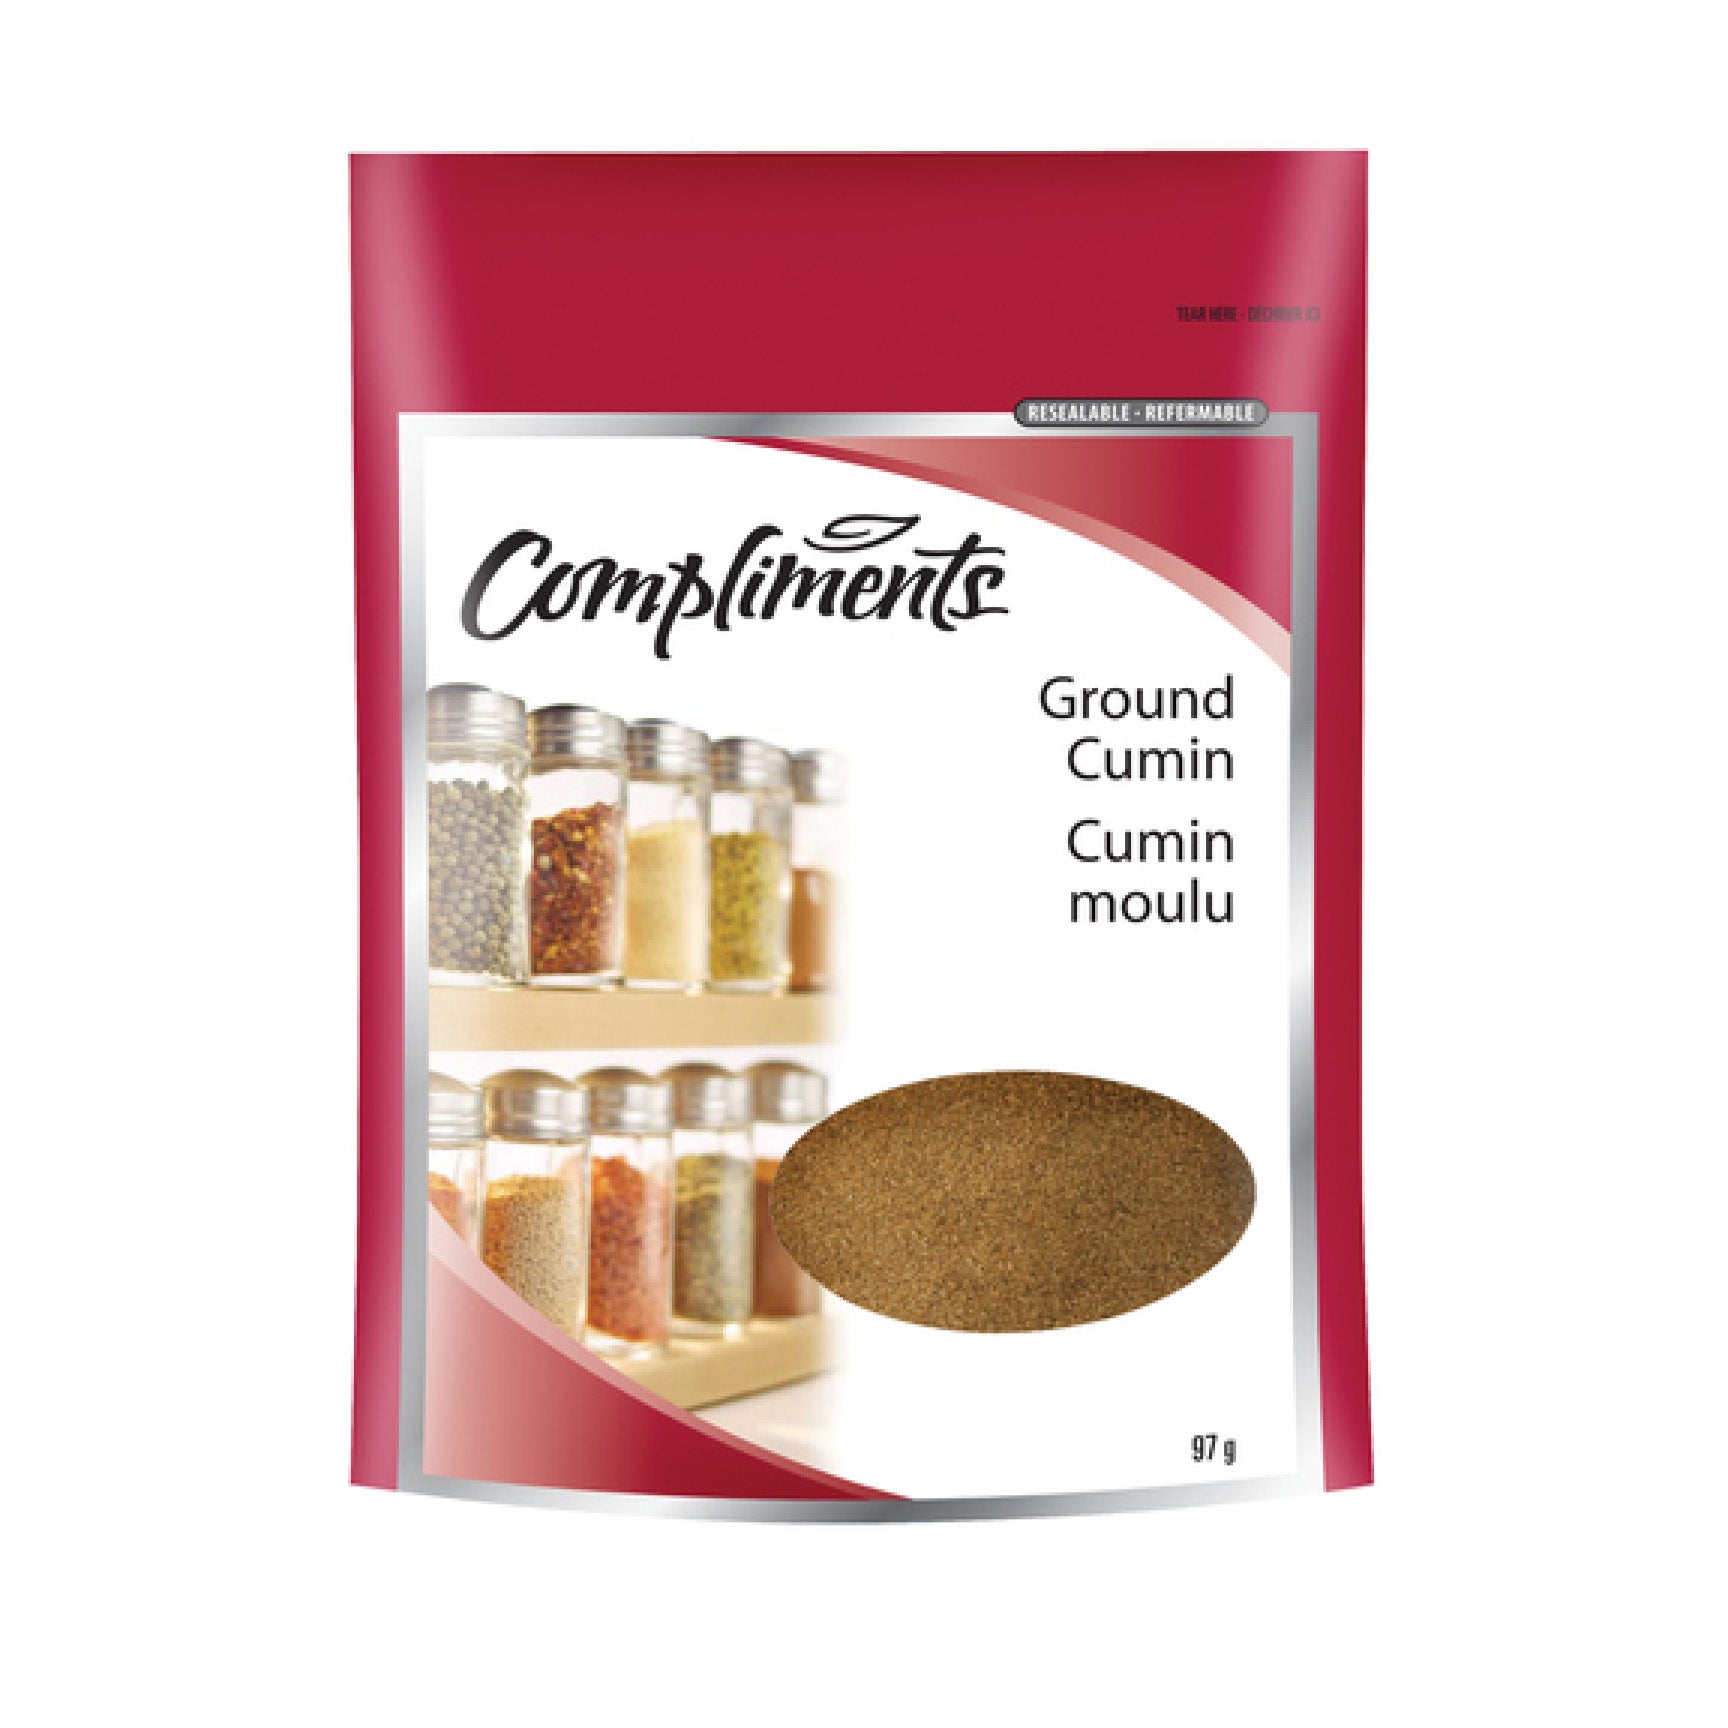 Compliments Ground Cumin , 97G